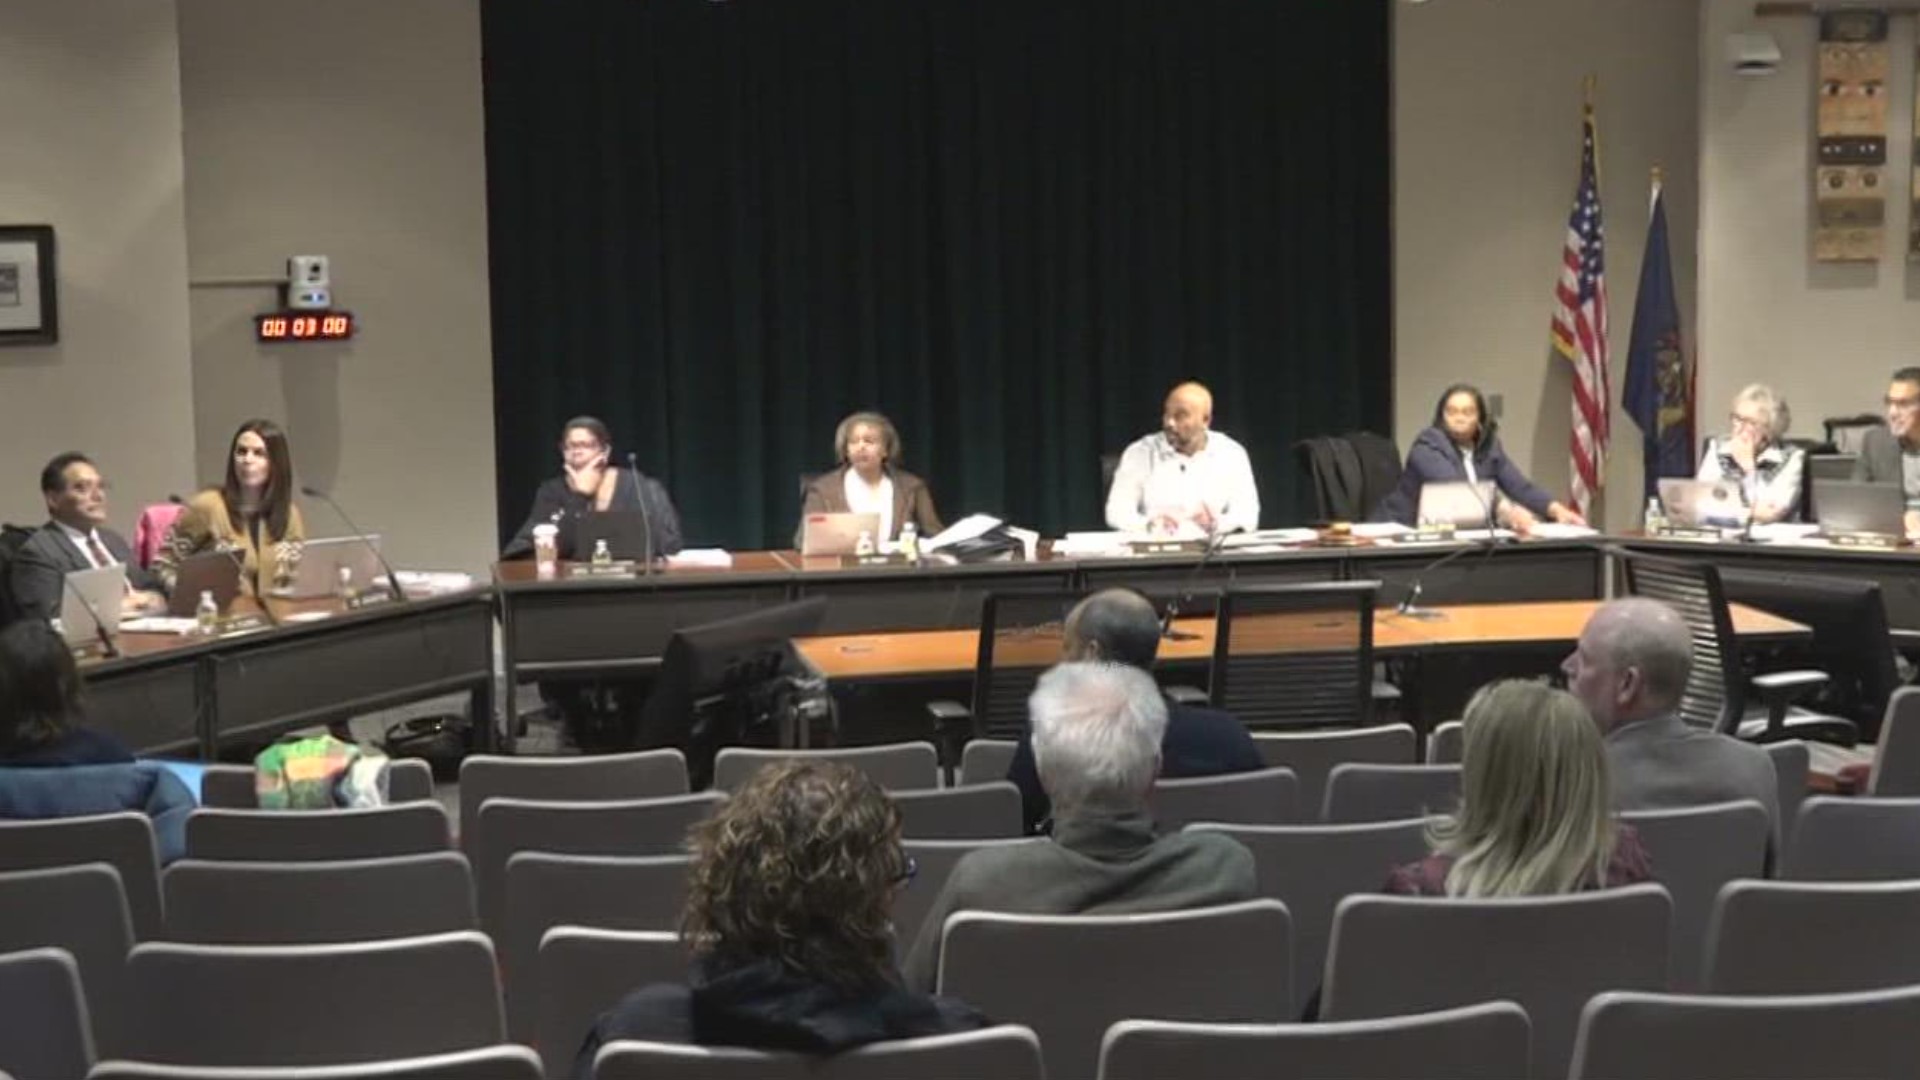 The old Adelante High School on Kensington Avenue will be torn down, as its part of the facilities master plan that will be implemented after a unanimous vote.